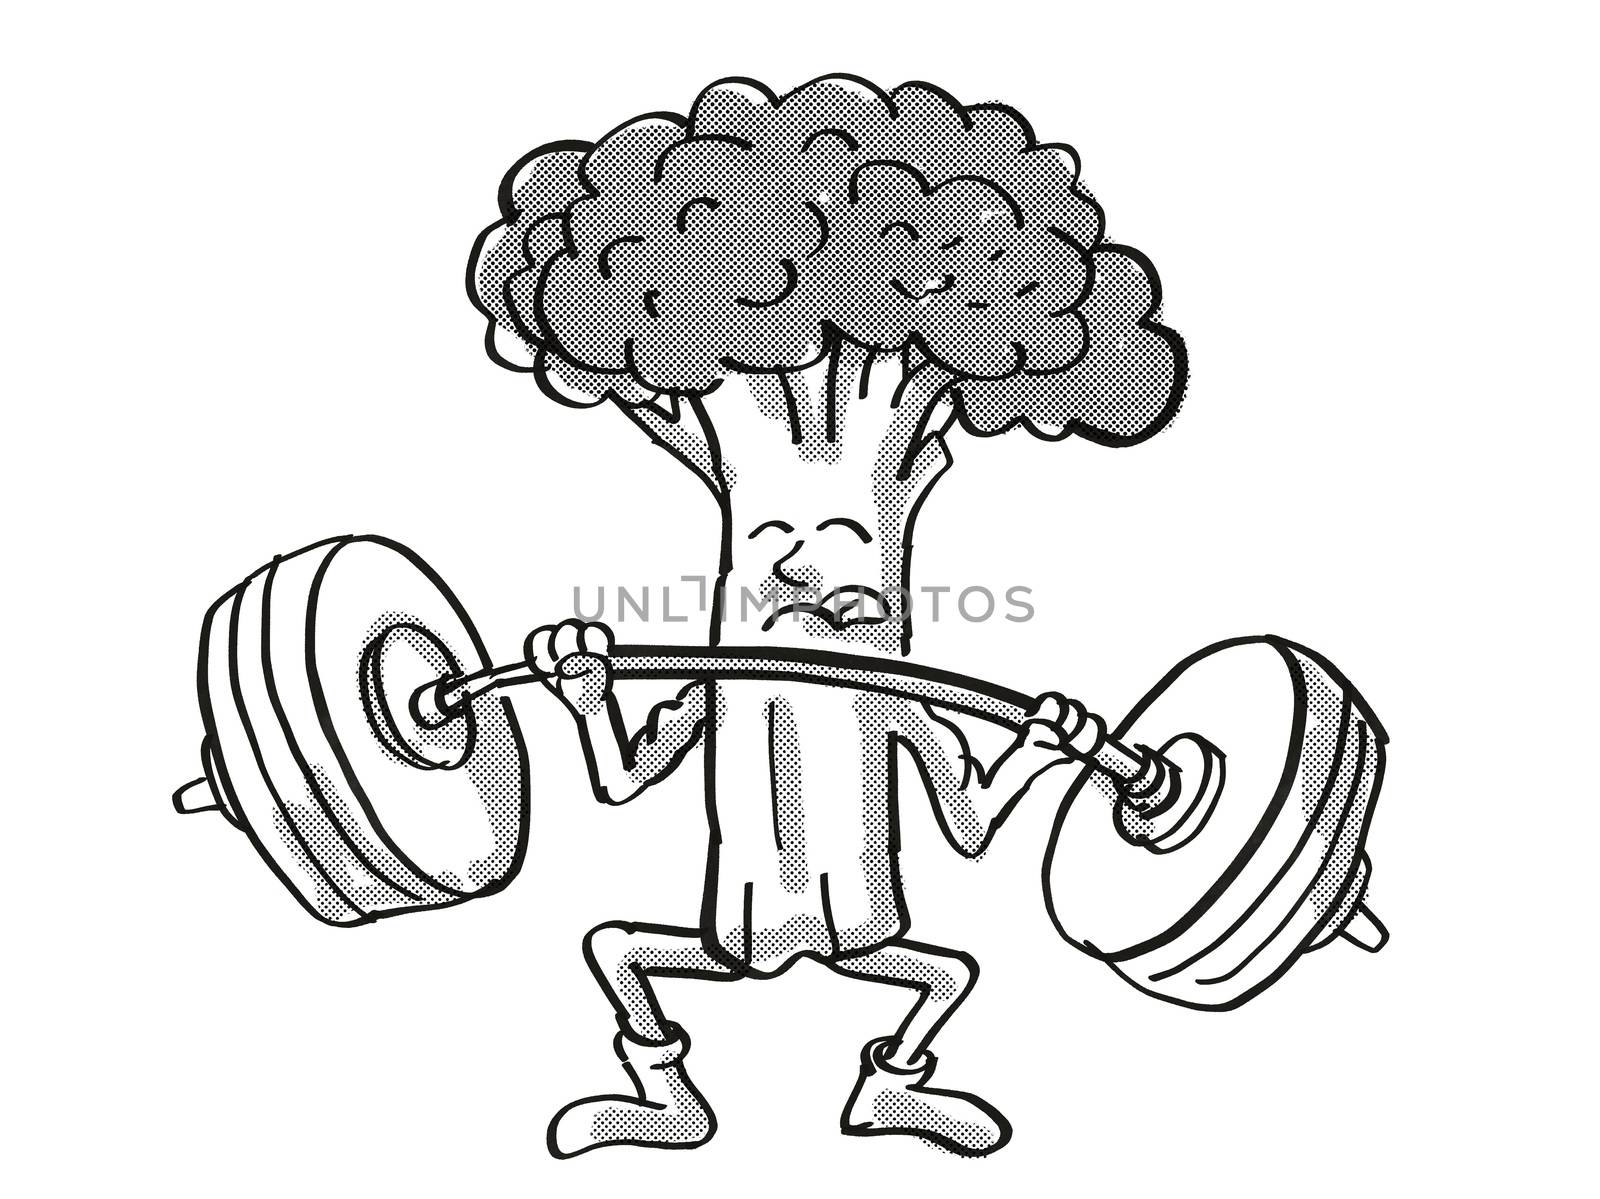 Retro cartoon style drawing of a Broccoli, a healthy vegetable lifting a barbell on isolated white background done in black and white.